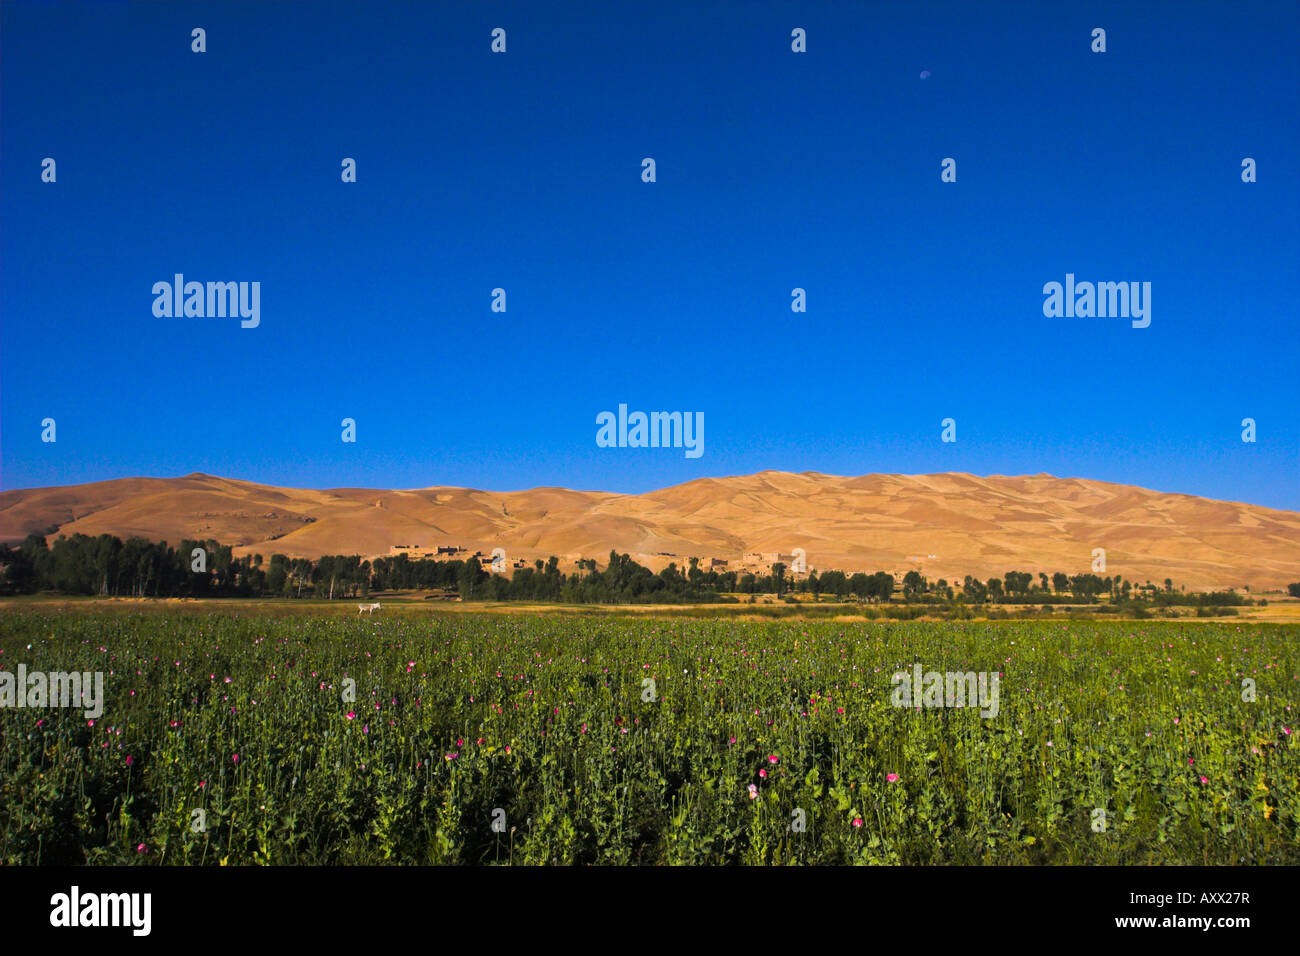 Poppy field between Daulitiar and Chakhcharan, Afghanistan, Asia Stock Photo